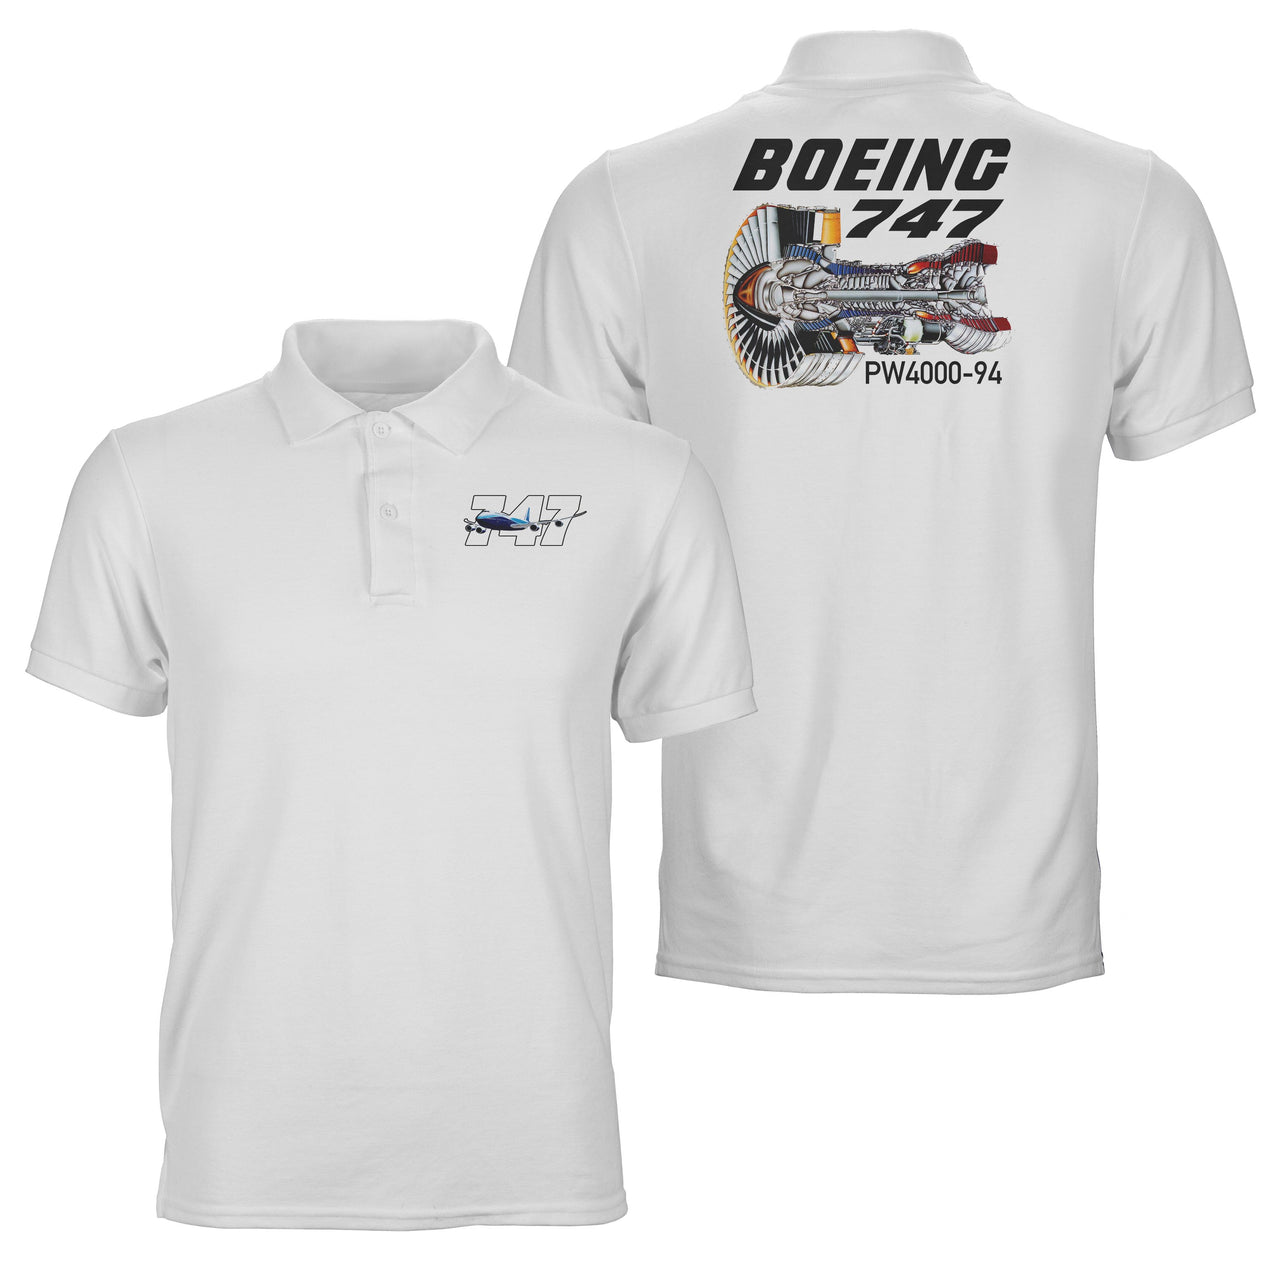 Boeing 747 & PW4000-94 Engine Designed Double Side Polo T-Shirts